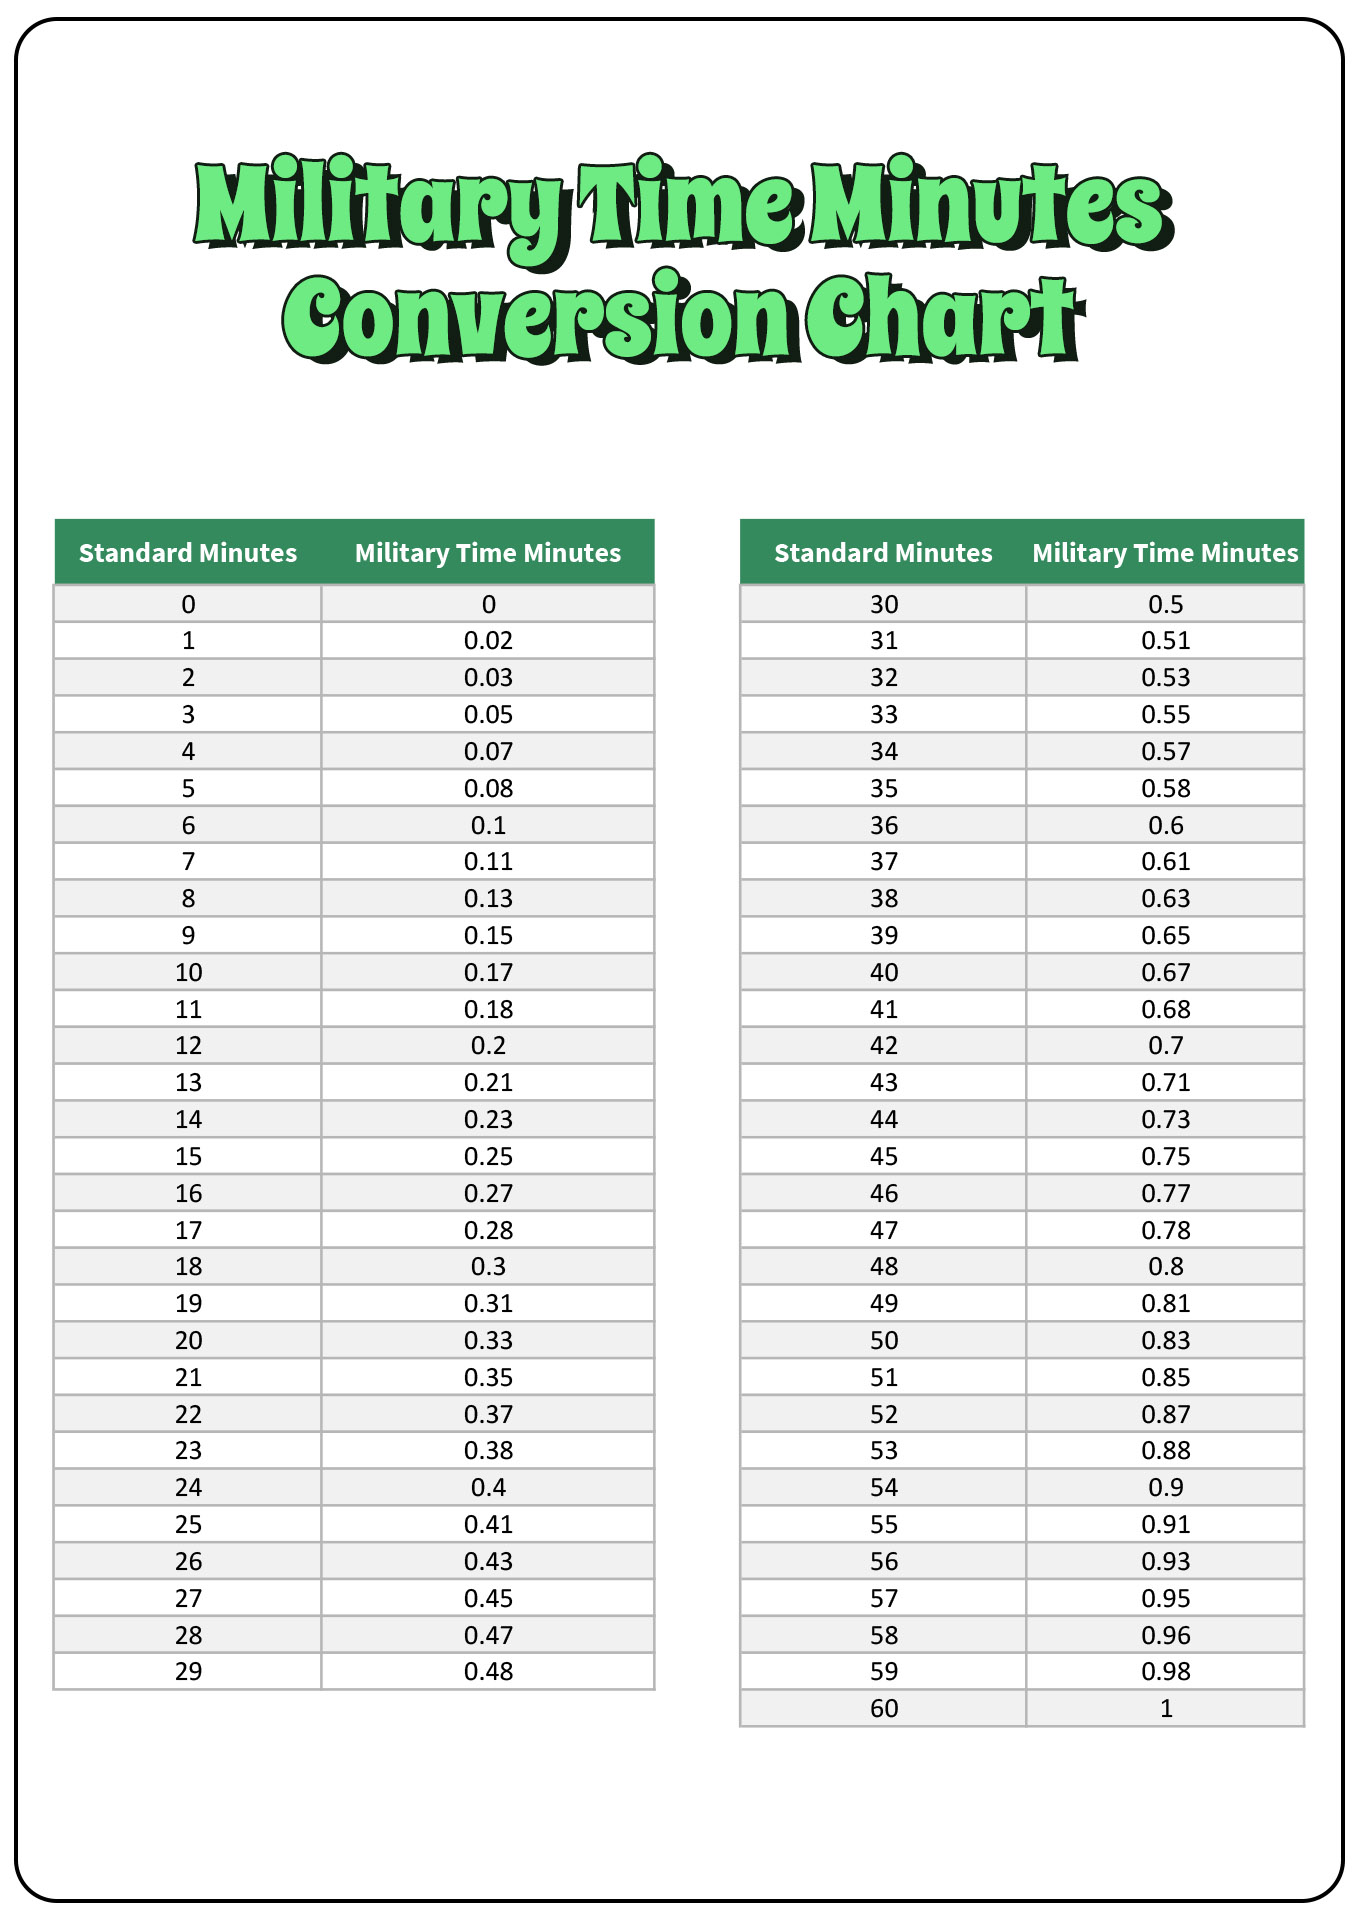 Military Time Minutes Conversion Chart Image